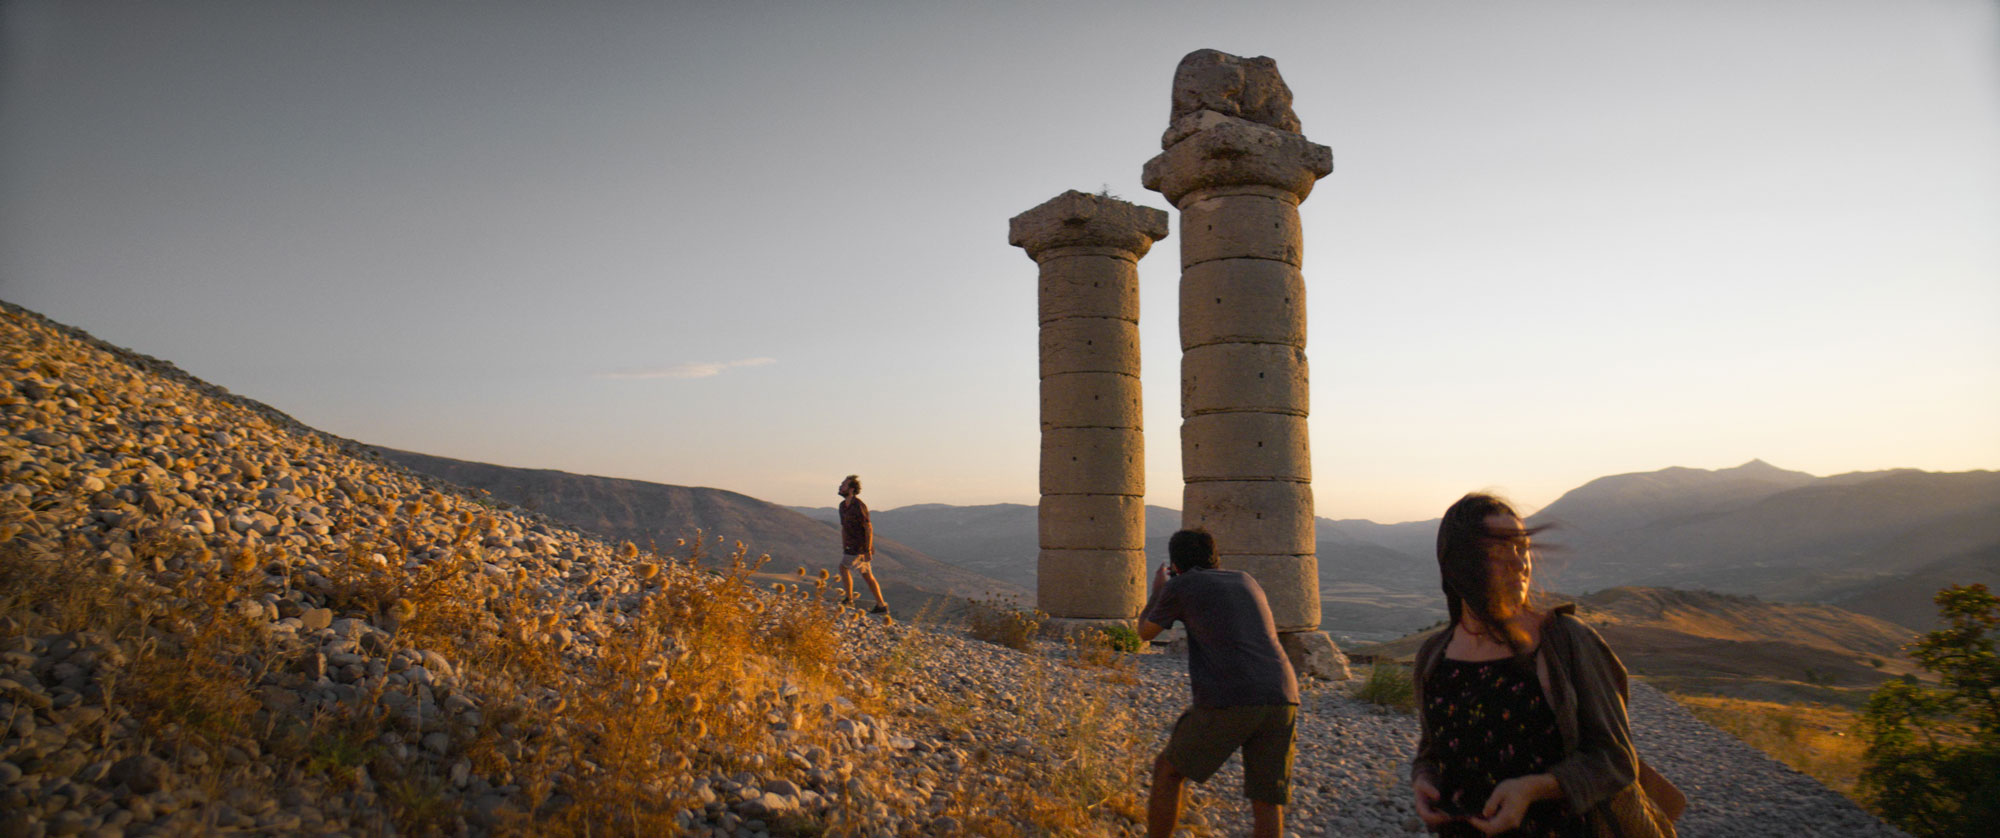 Three people in golden-lit landscape with ruins of two large columns